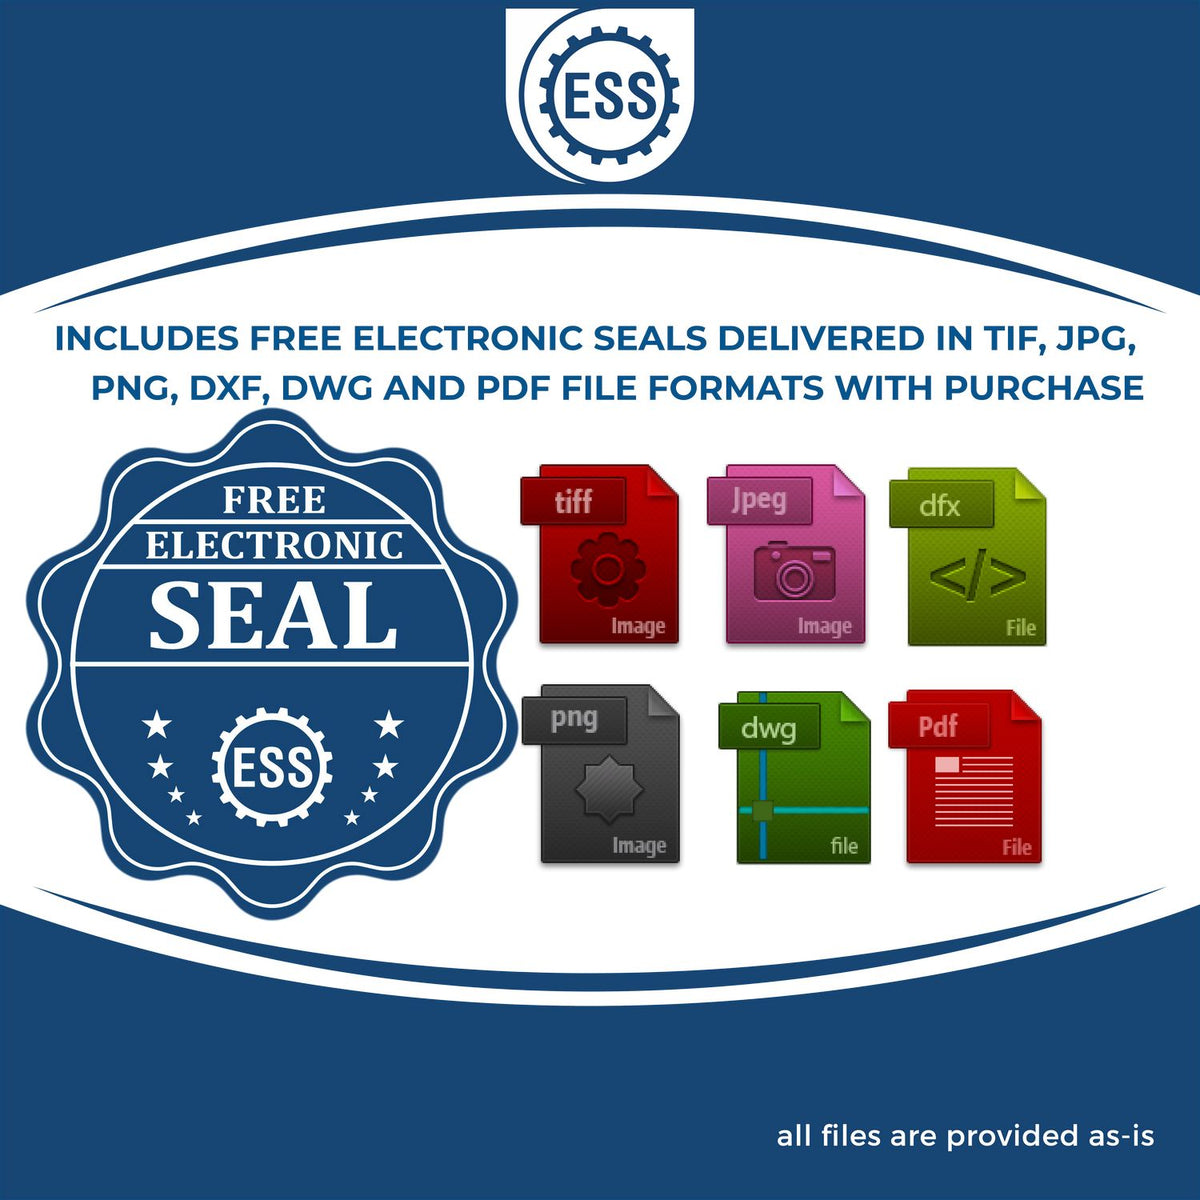 An infographic for the free electronic seal for the State of Connecticut Long Reach Architectural Embossing Seal illustrating the different file type icons such as DXF, DWG, TIF, JPG and PNG.